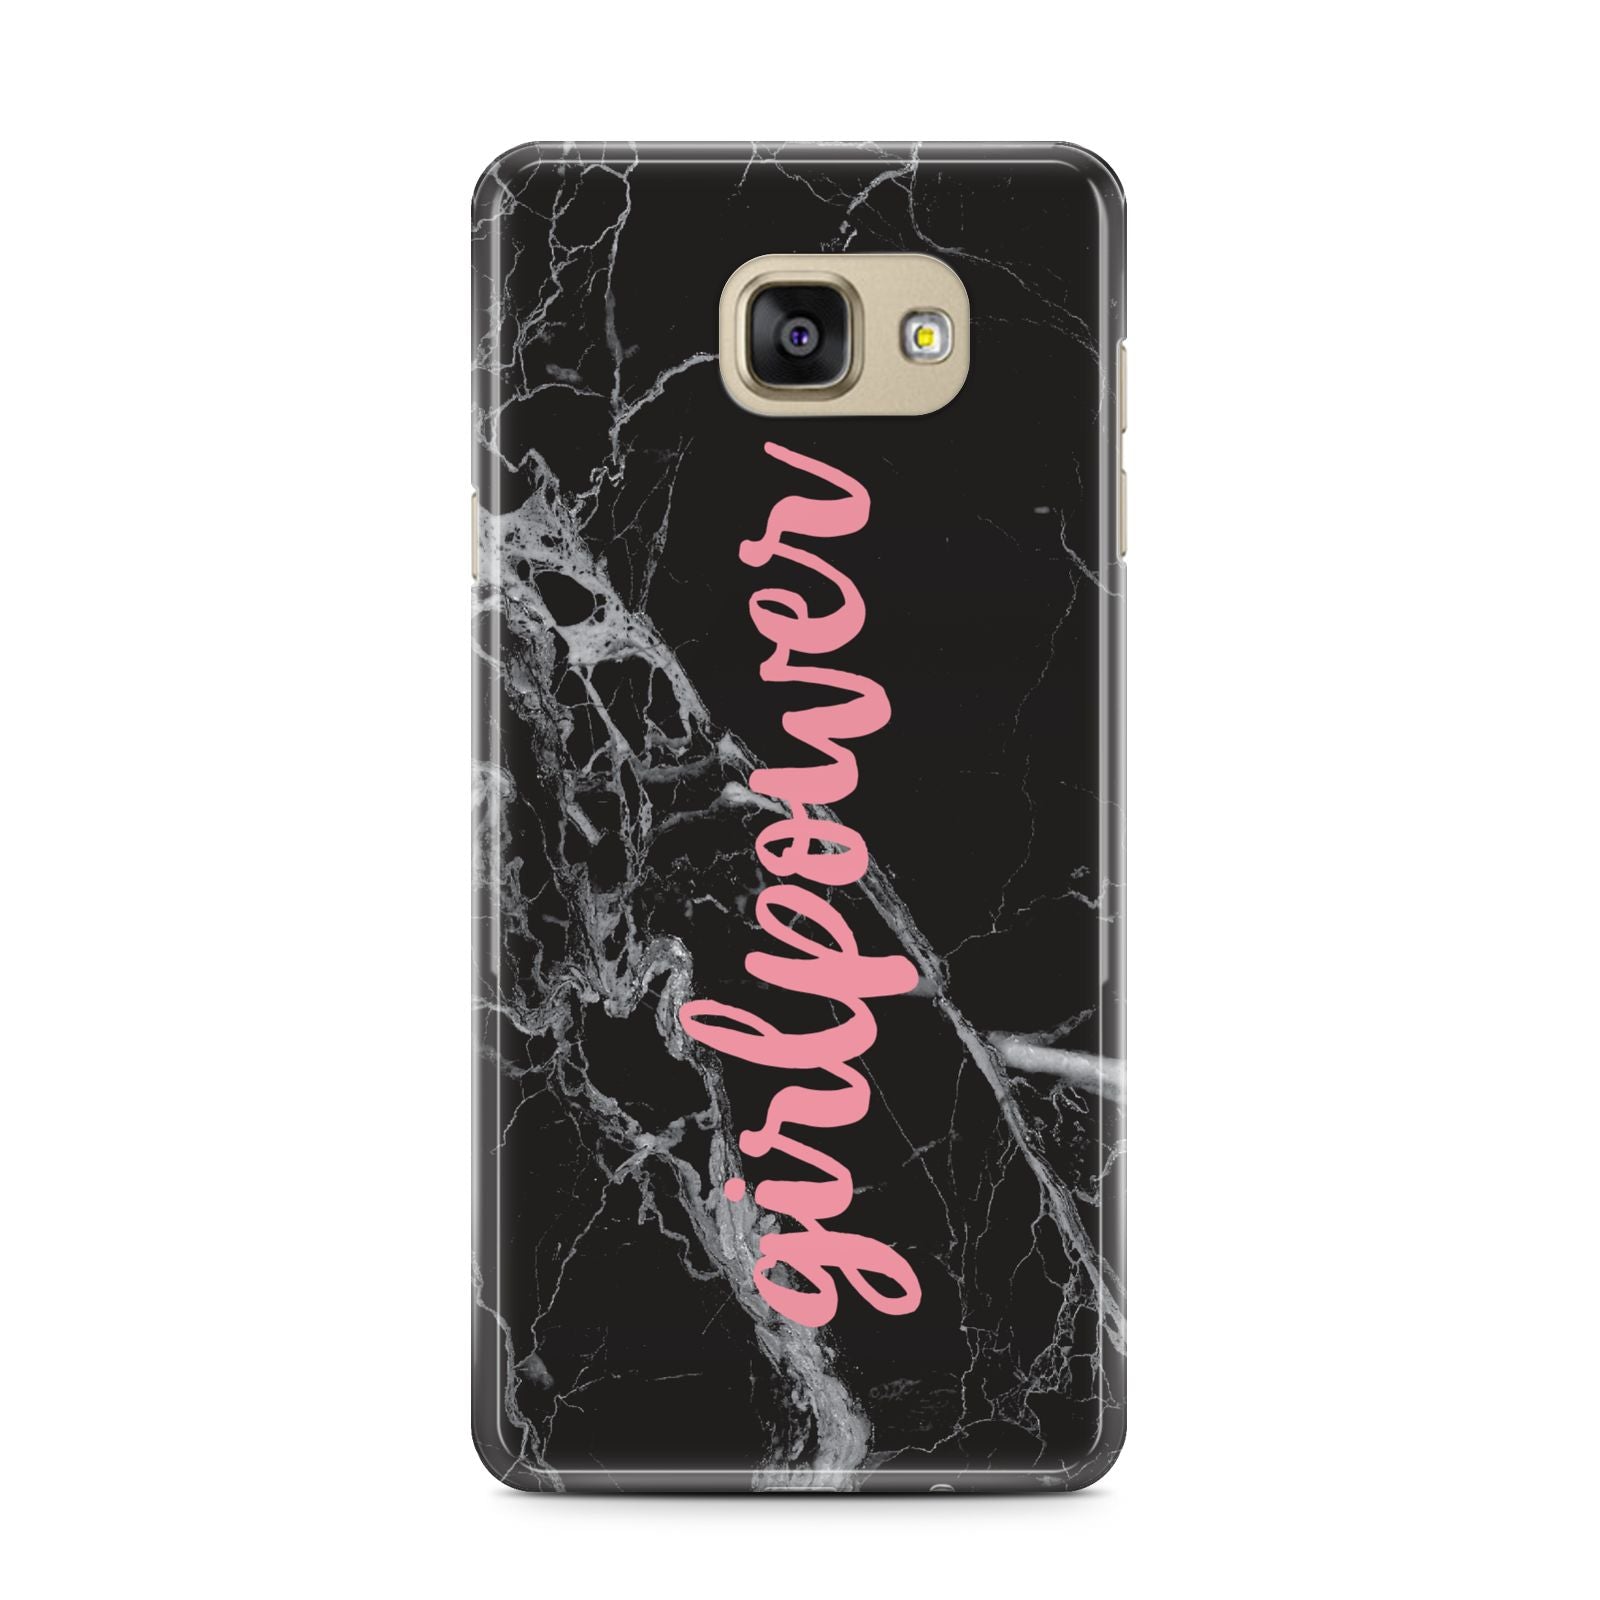 Girlpower Black White Marble Effect Samsung Galaxy A7 2016 Case on gold phone